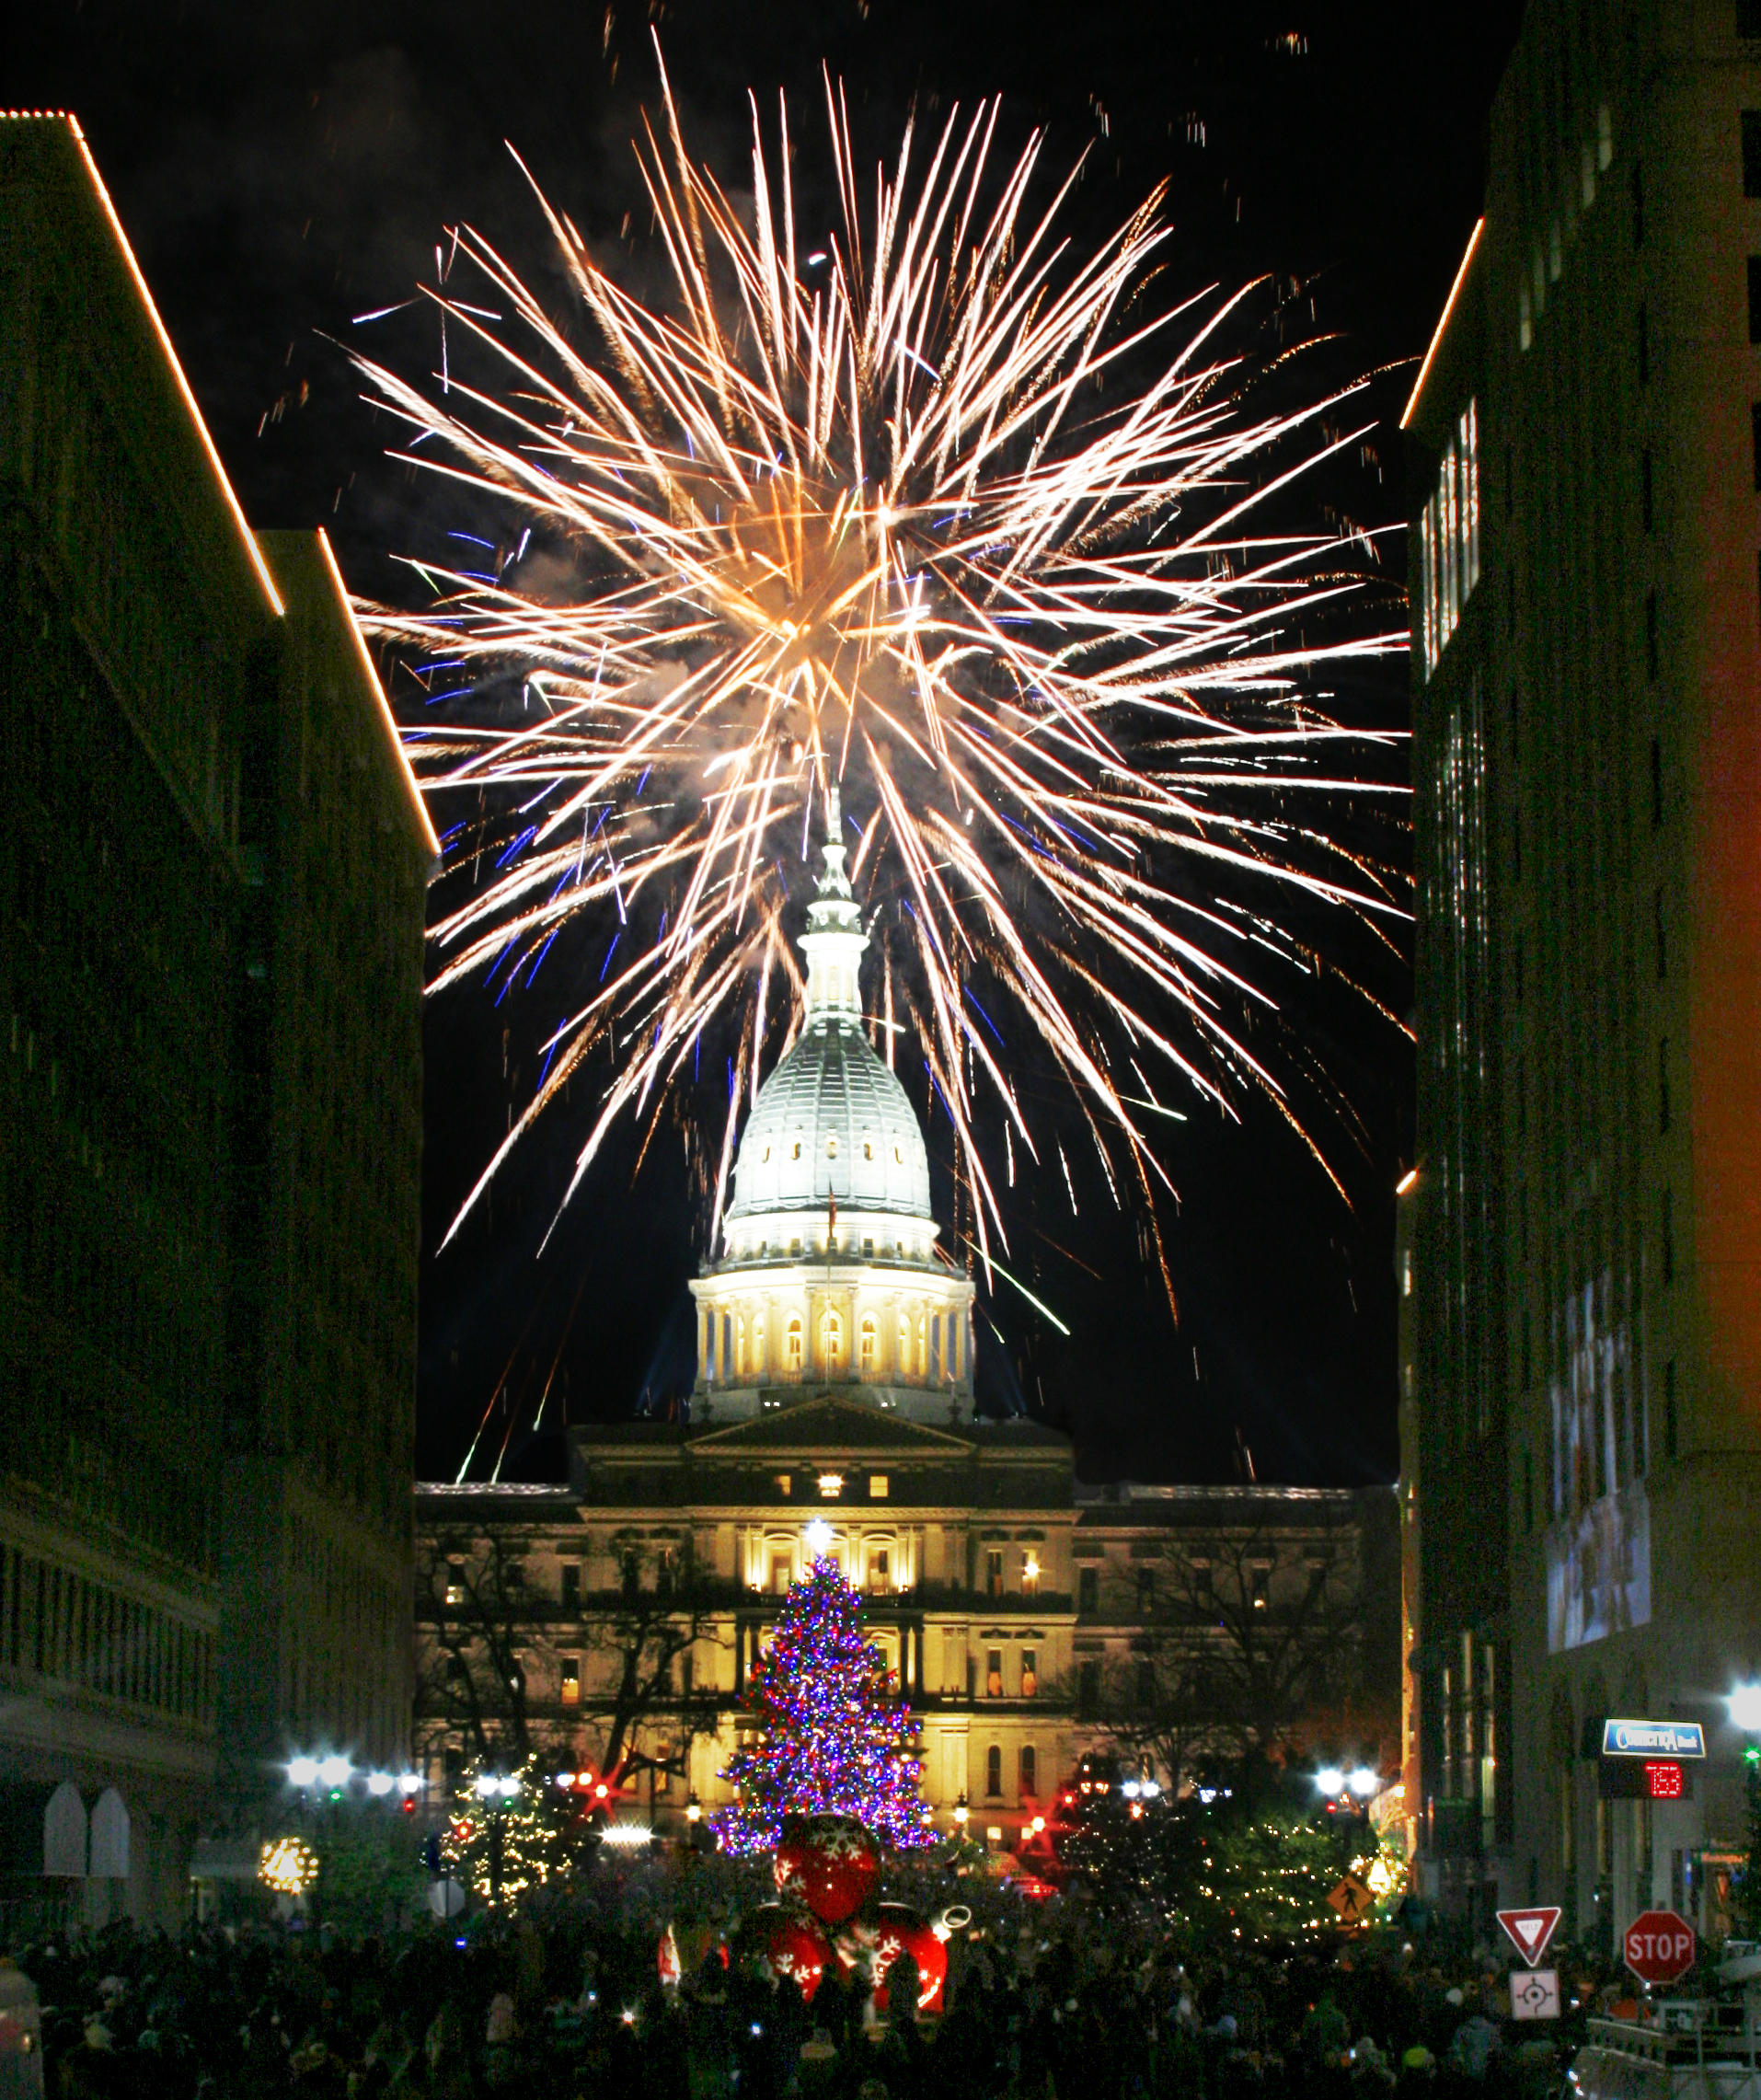 Silver Bells in the City Announcing 38th Year